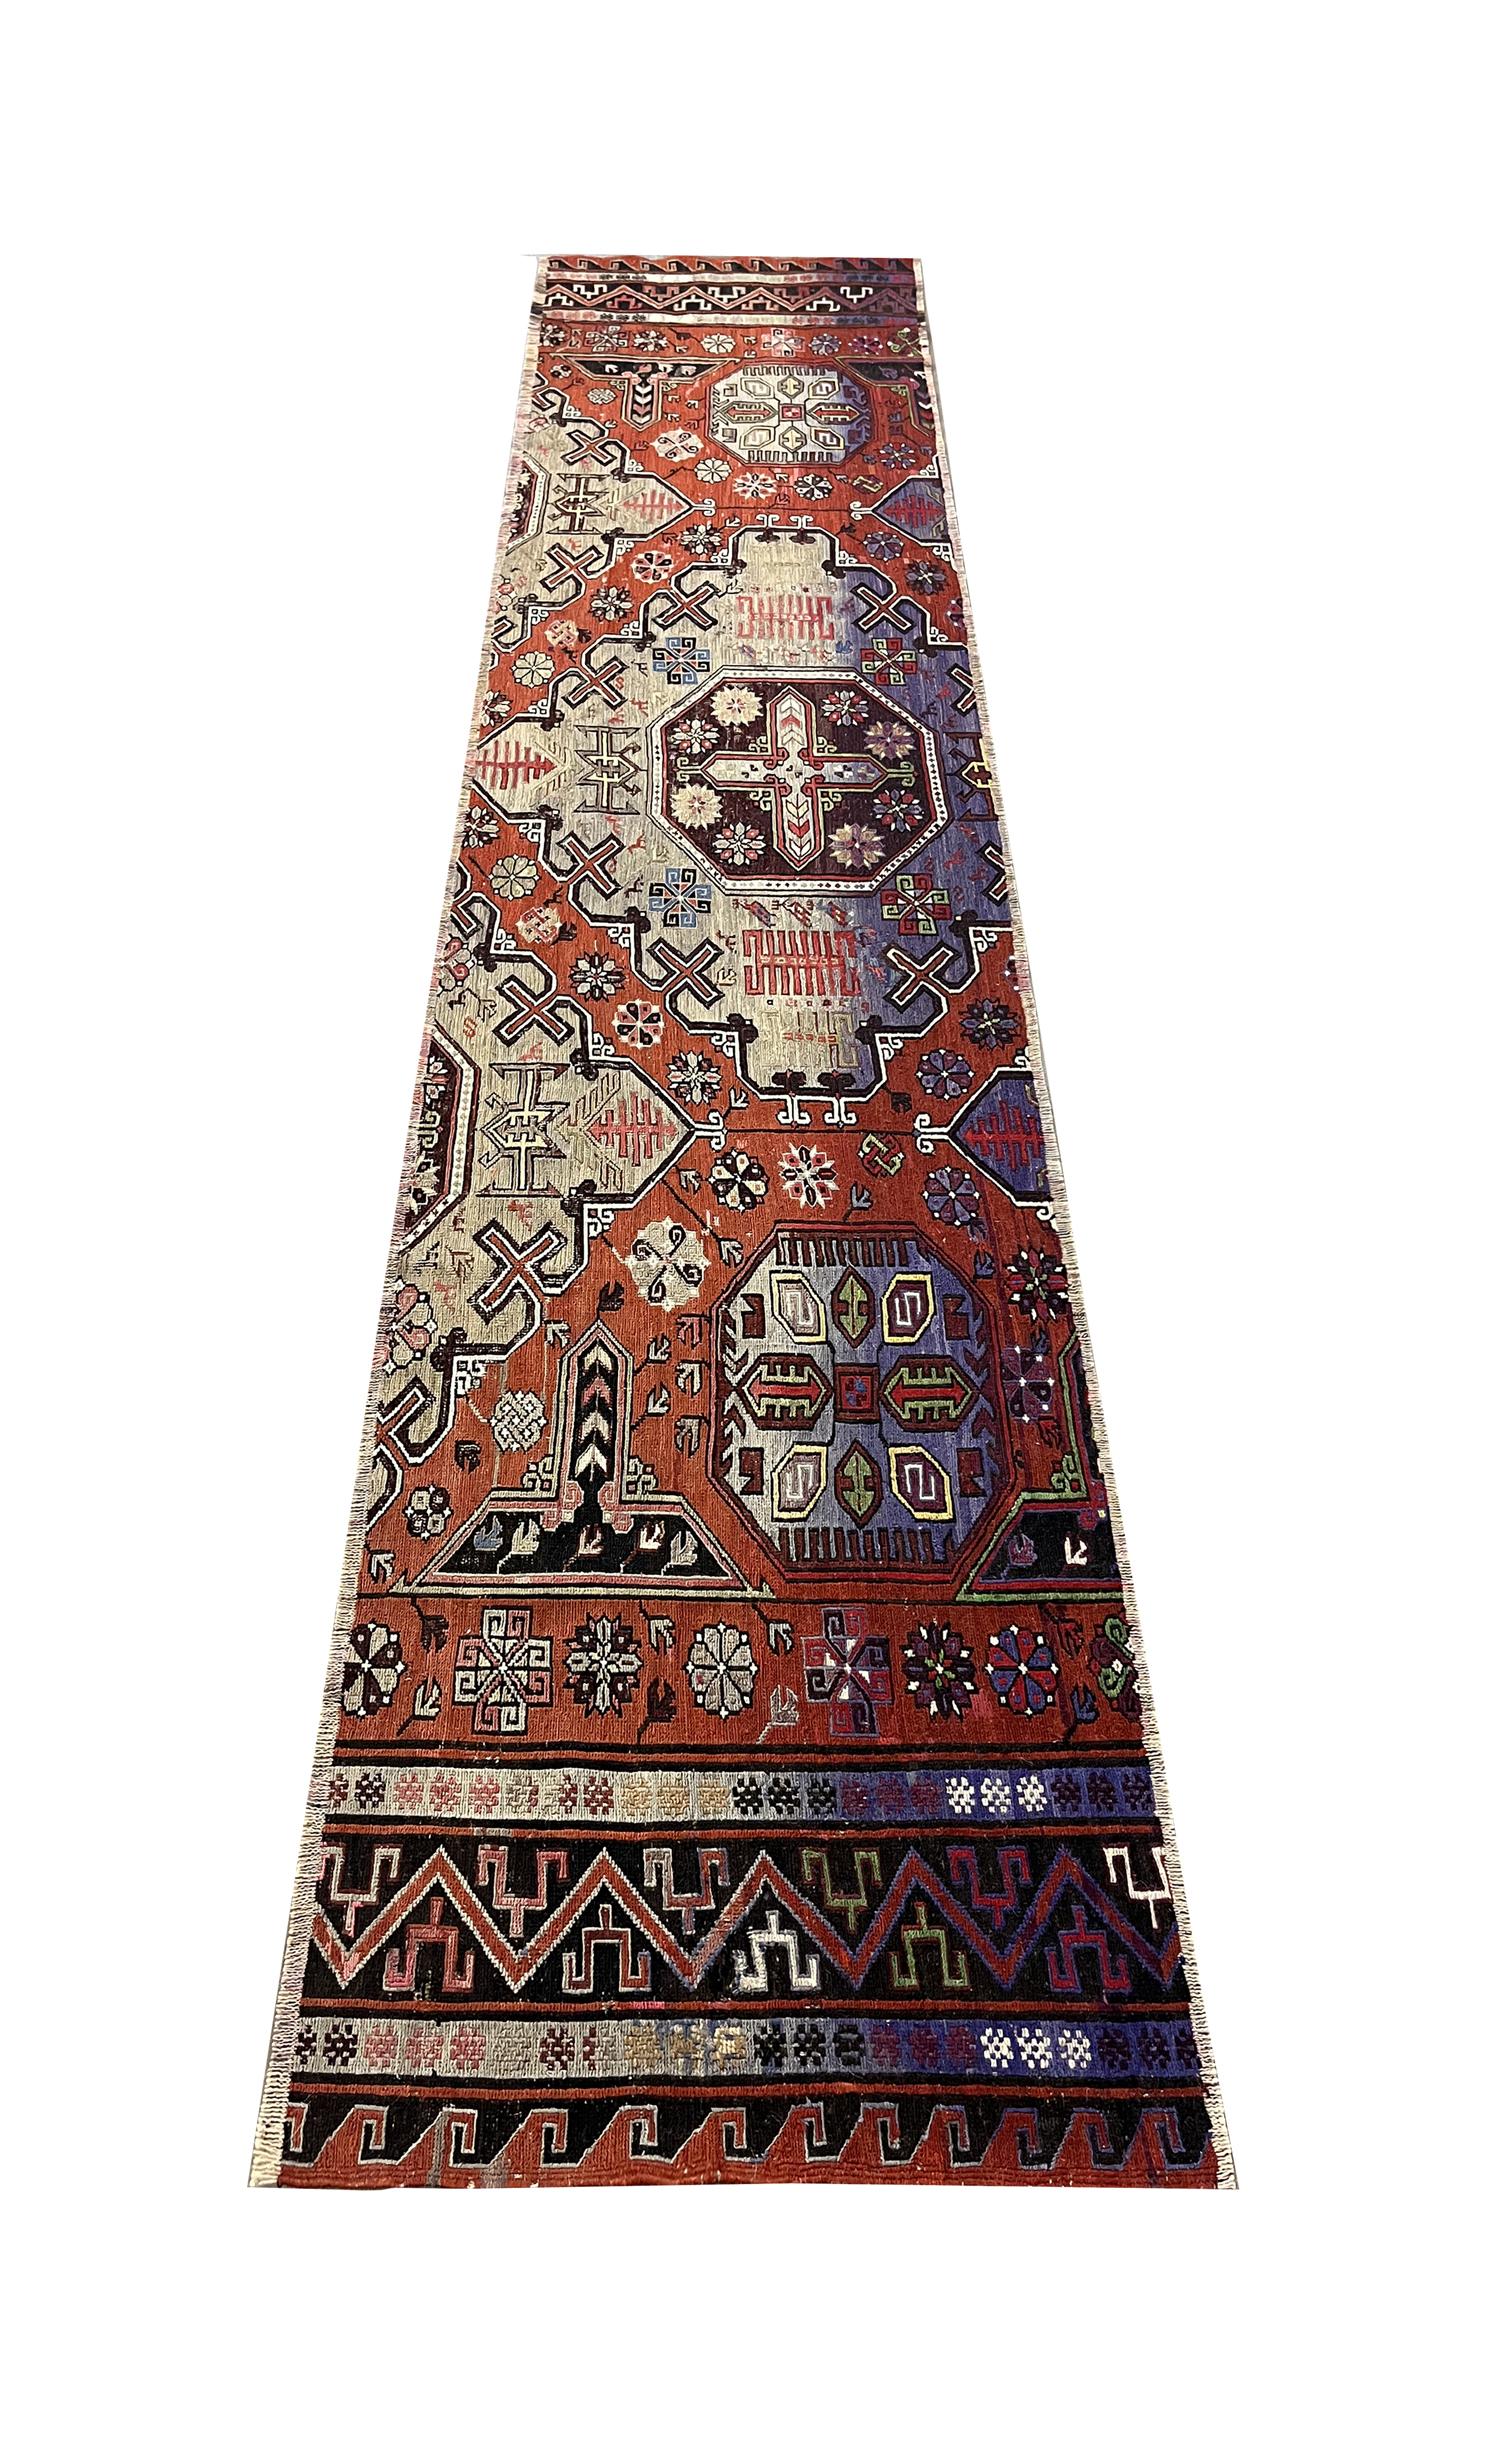 This truly unique soumak runner rug is a fantastic example of antique textiles woven in 1910. The design features bold geometric pattens intricately woven in accents of deep red, beige, blue and brown. Easily stle this fine wool area rug with both